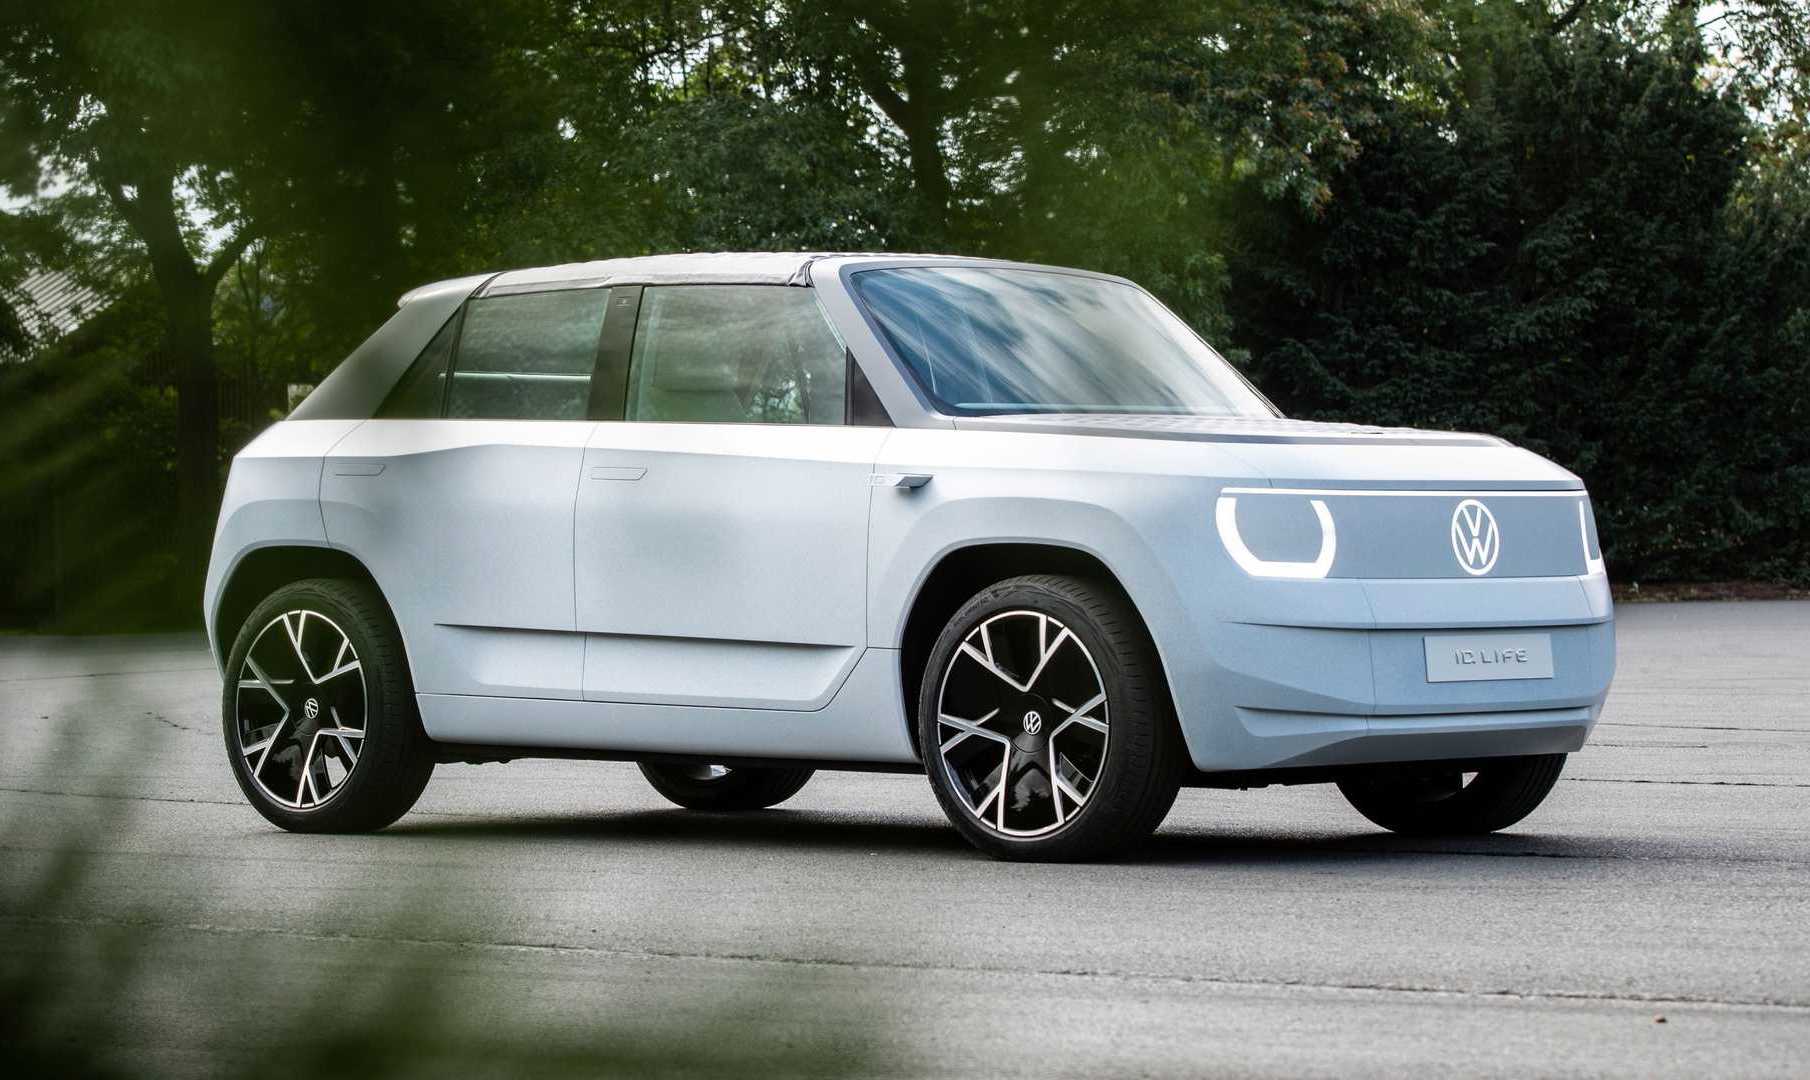 Render image shows Volkswagen's compact electric car VW ID.2 in a more